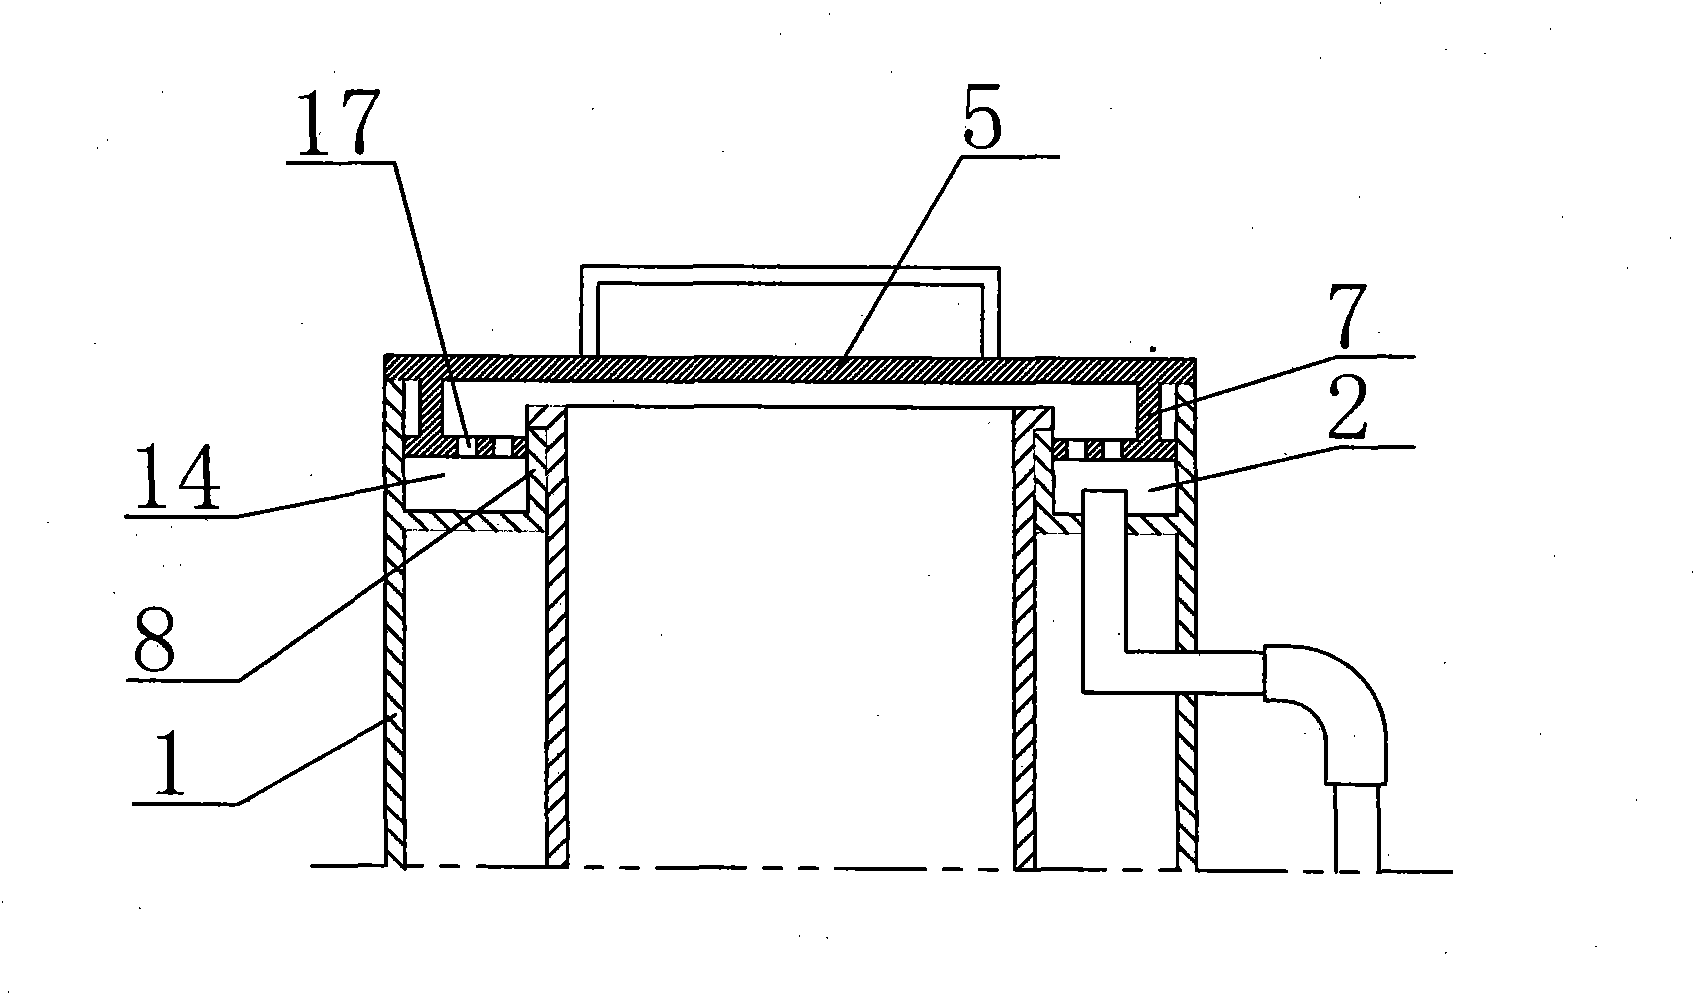 Sealing device for biomass gasification furnace